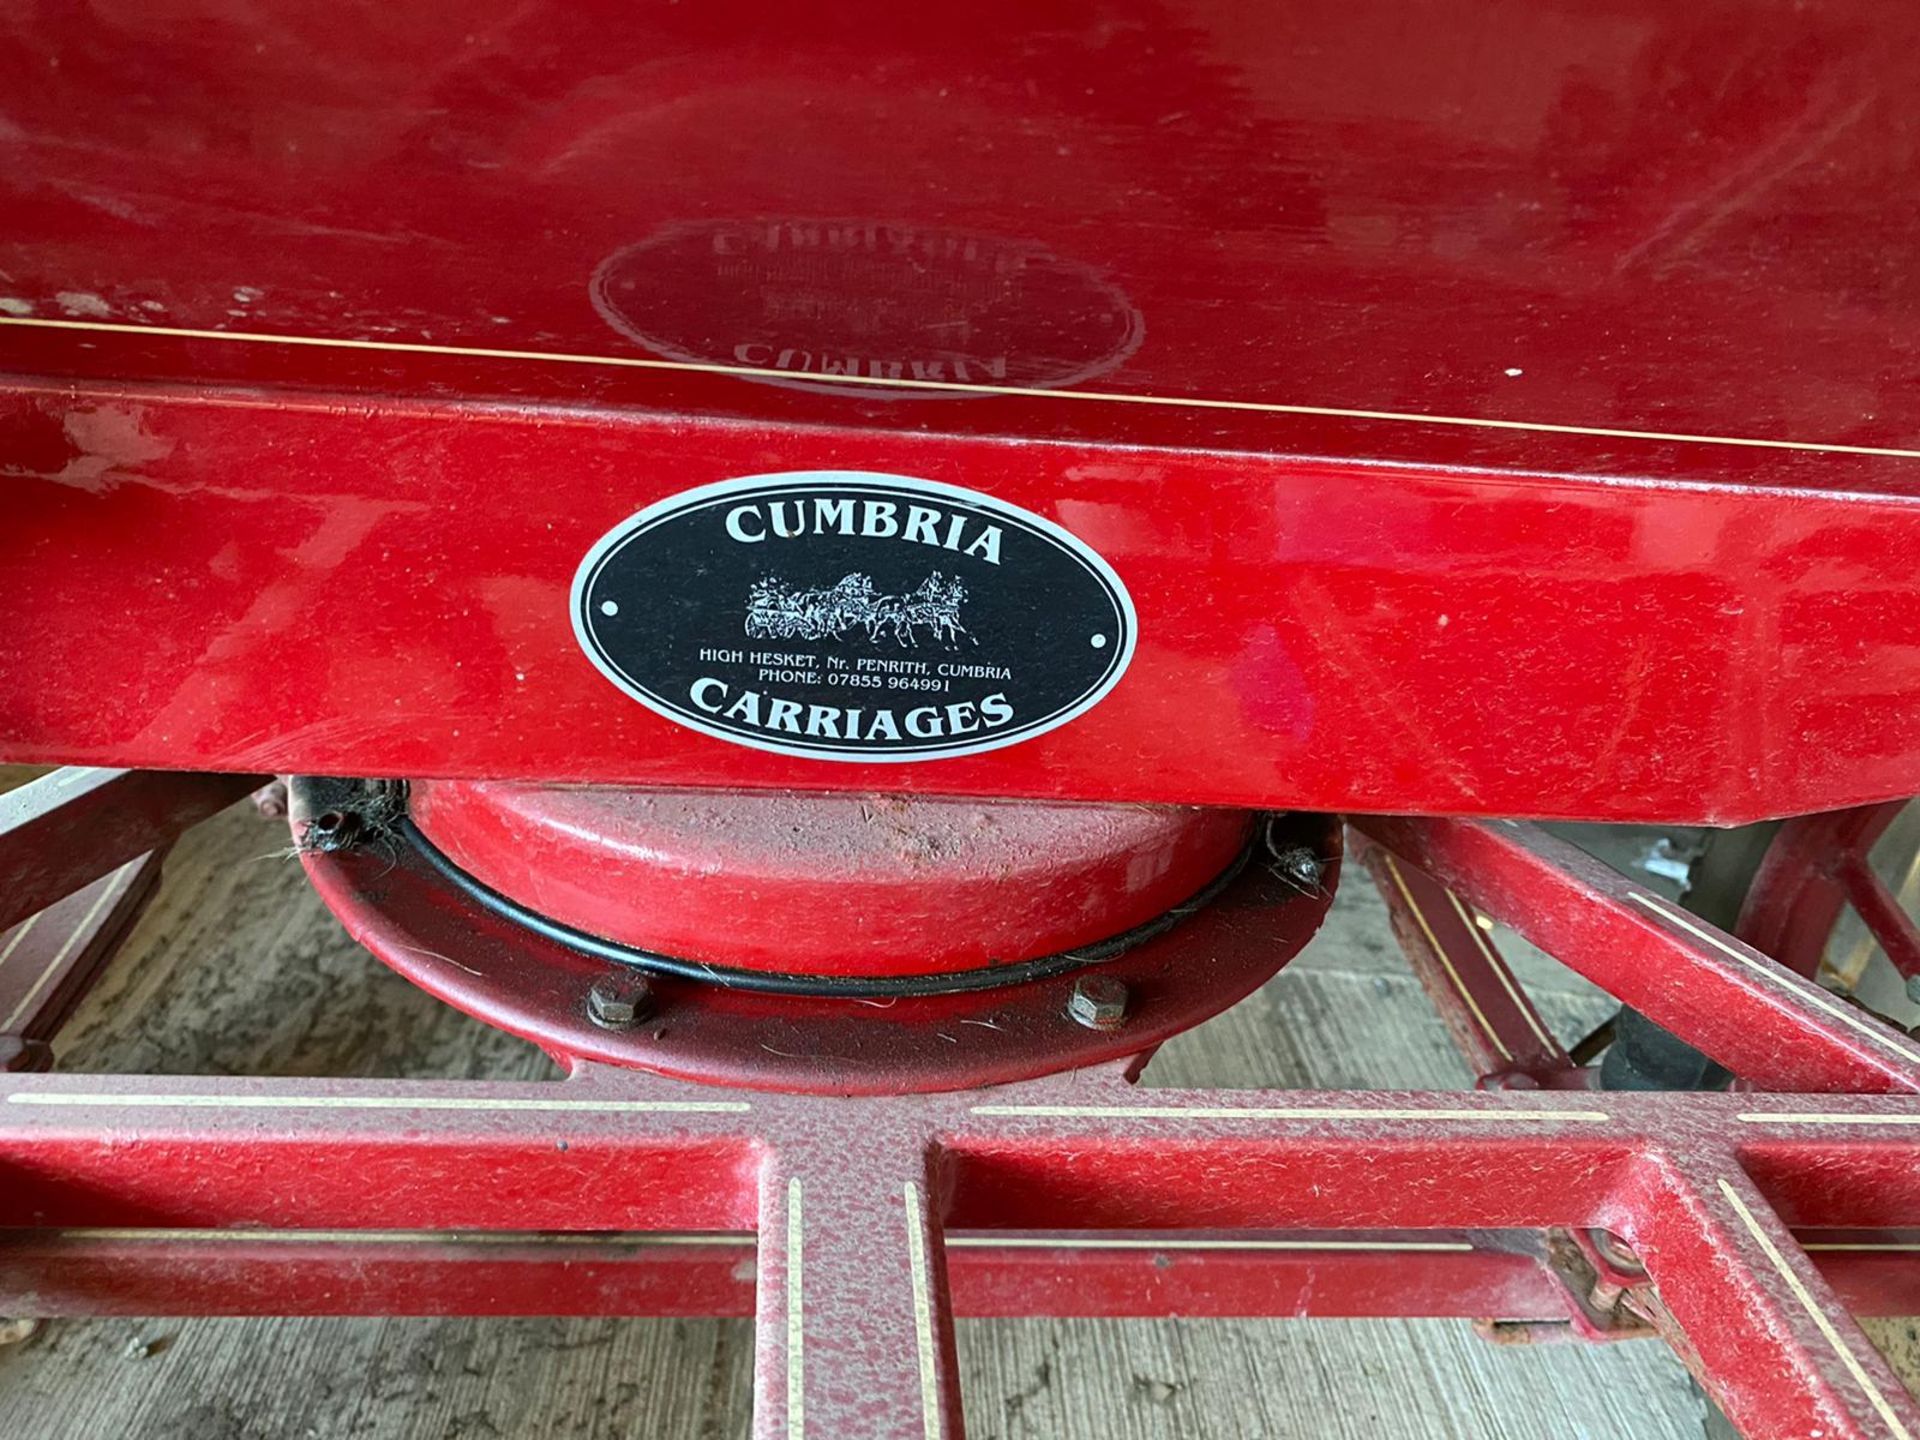 CUMBRIA CARRIAGES 4WHEEL HORSE CART. LOCATION: NORTH YORKSHIRE - Image 3 of 5